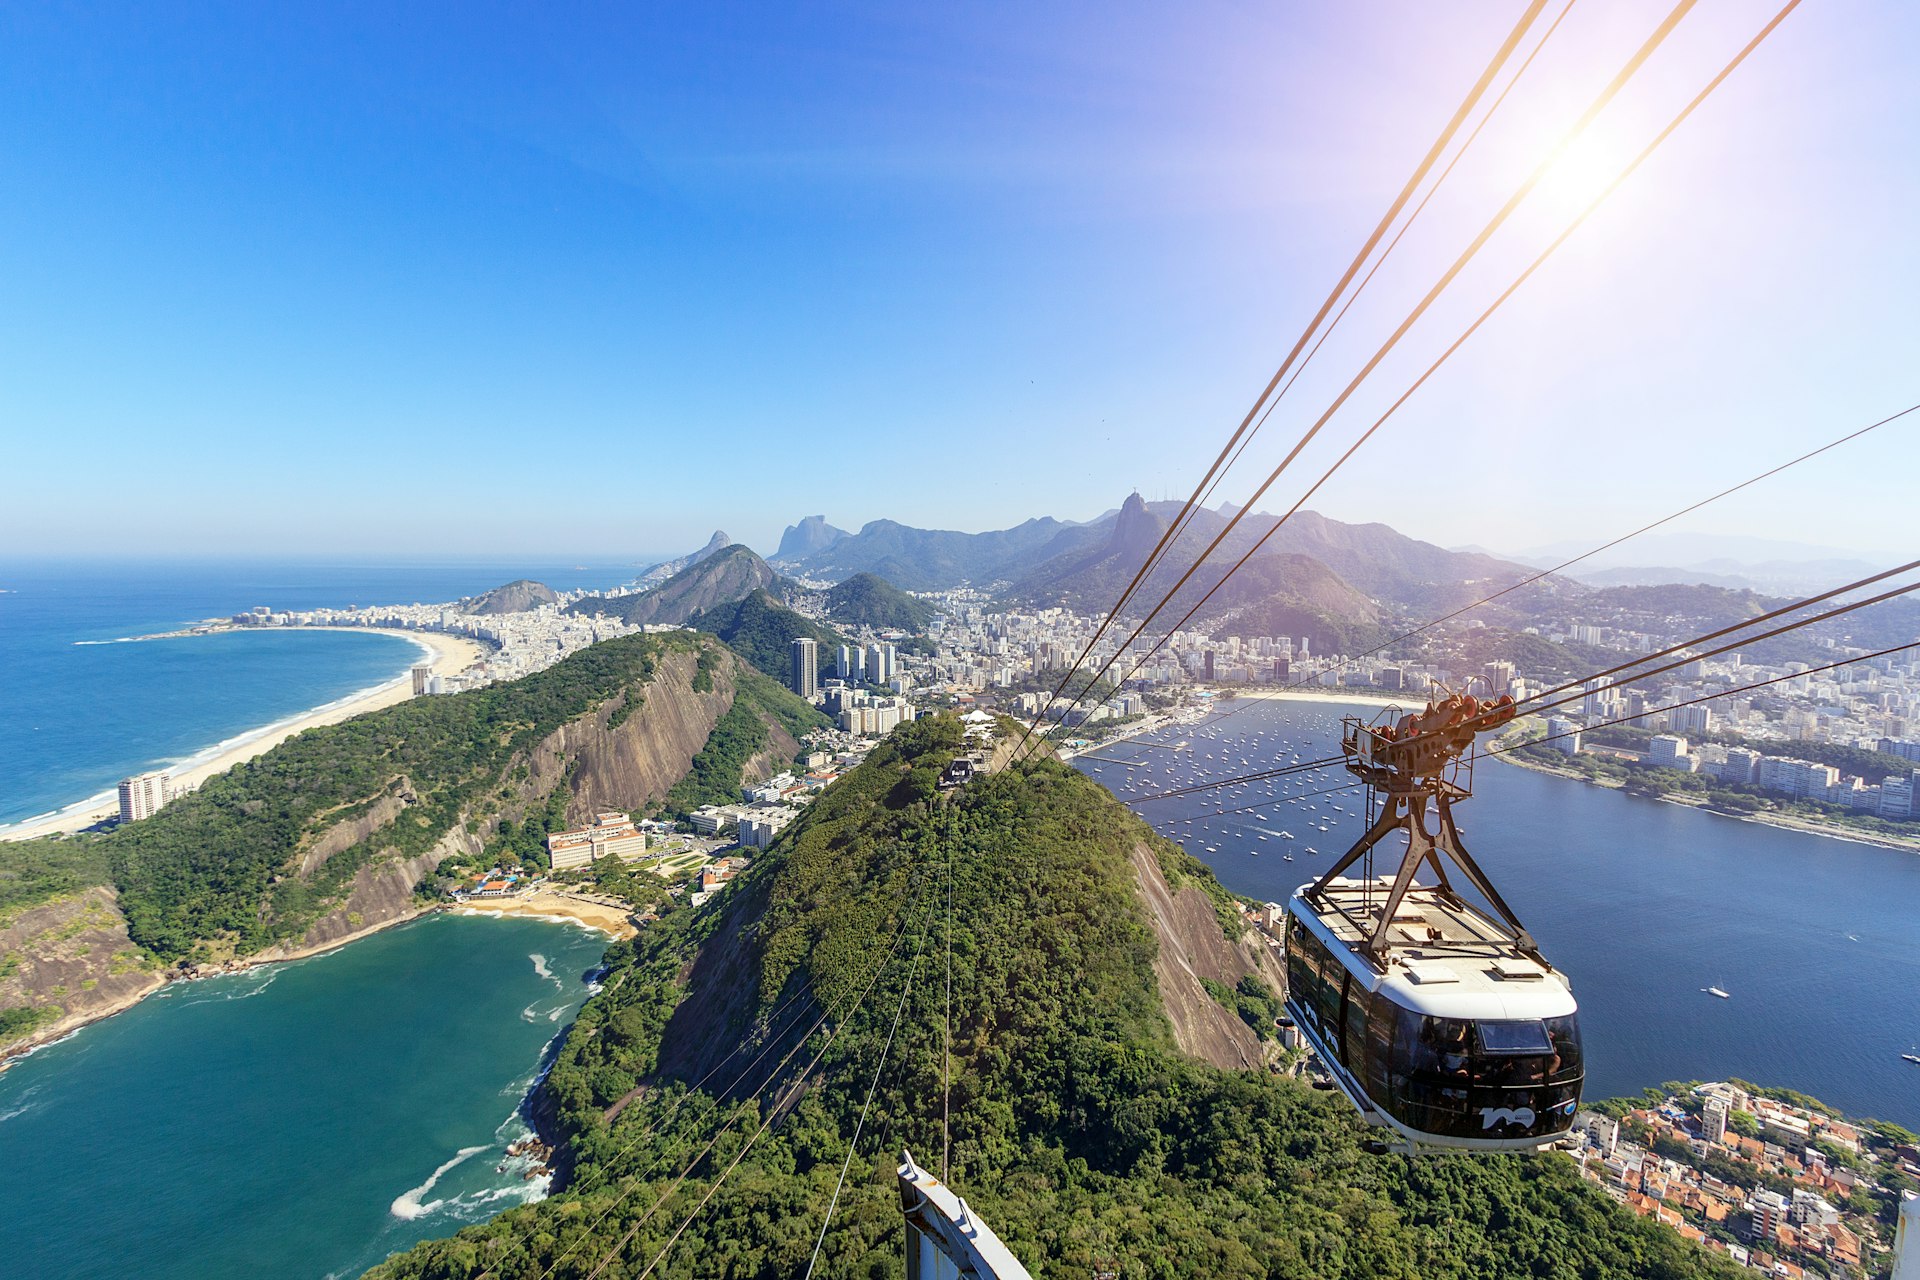 The view from Sugarloaf Mountain, looking down on the cable car which runs down to Rio de Janeiro in Brazil with the glistening blue ocean beneath. 